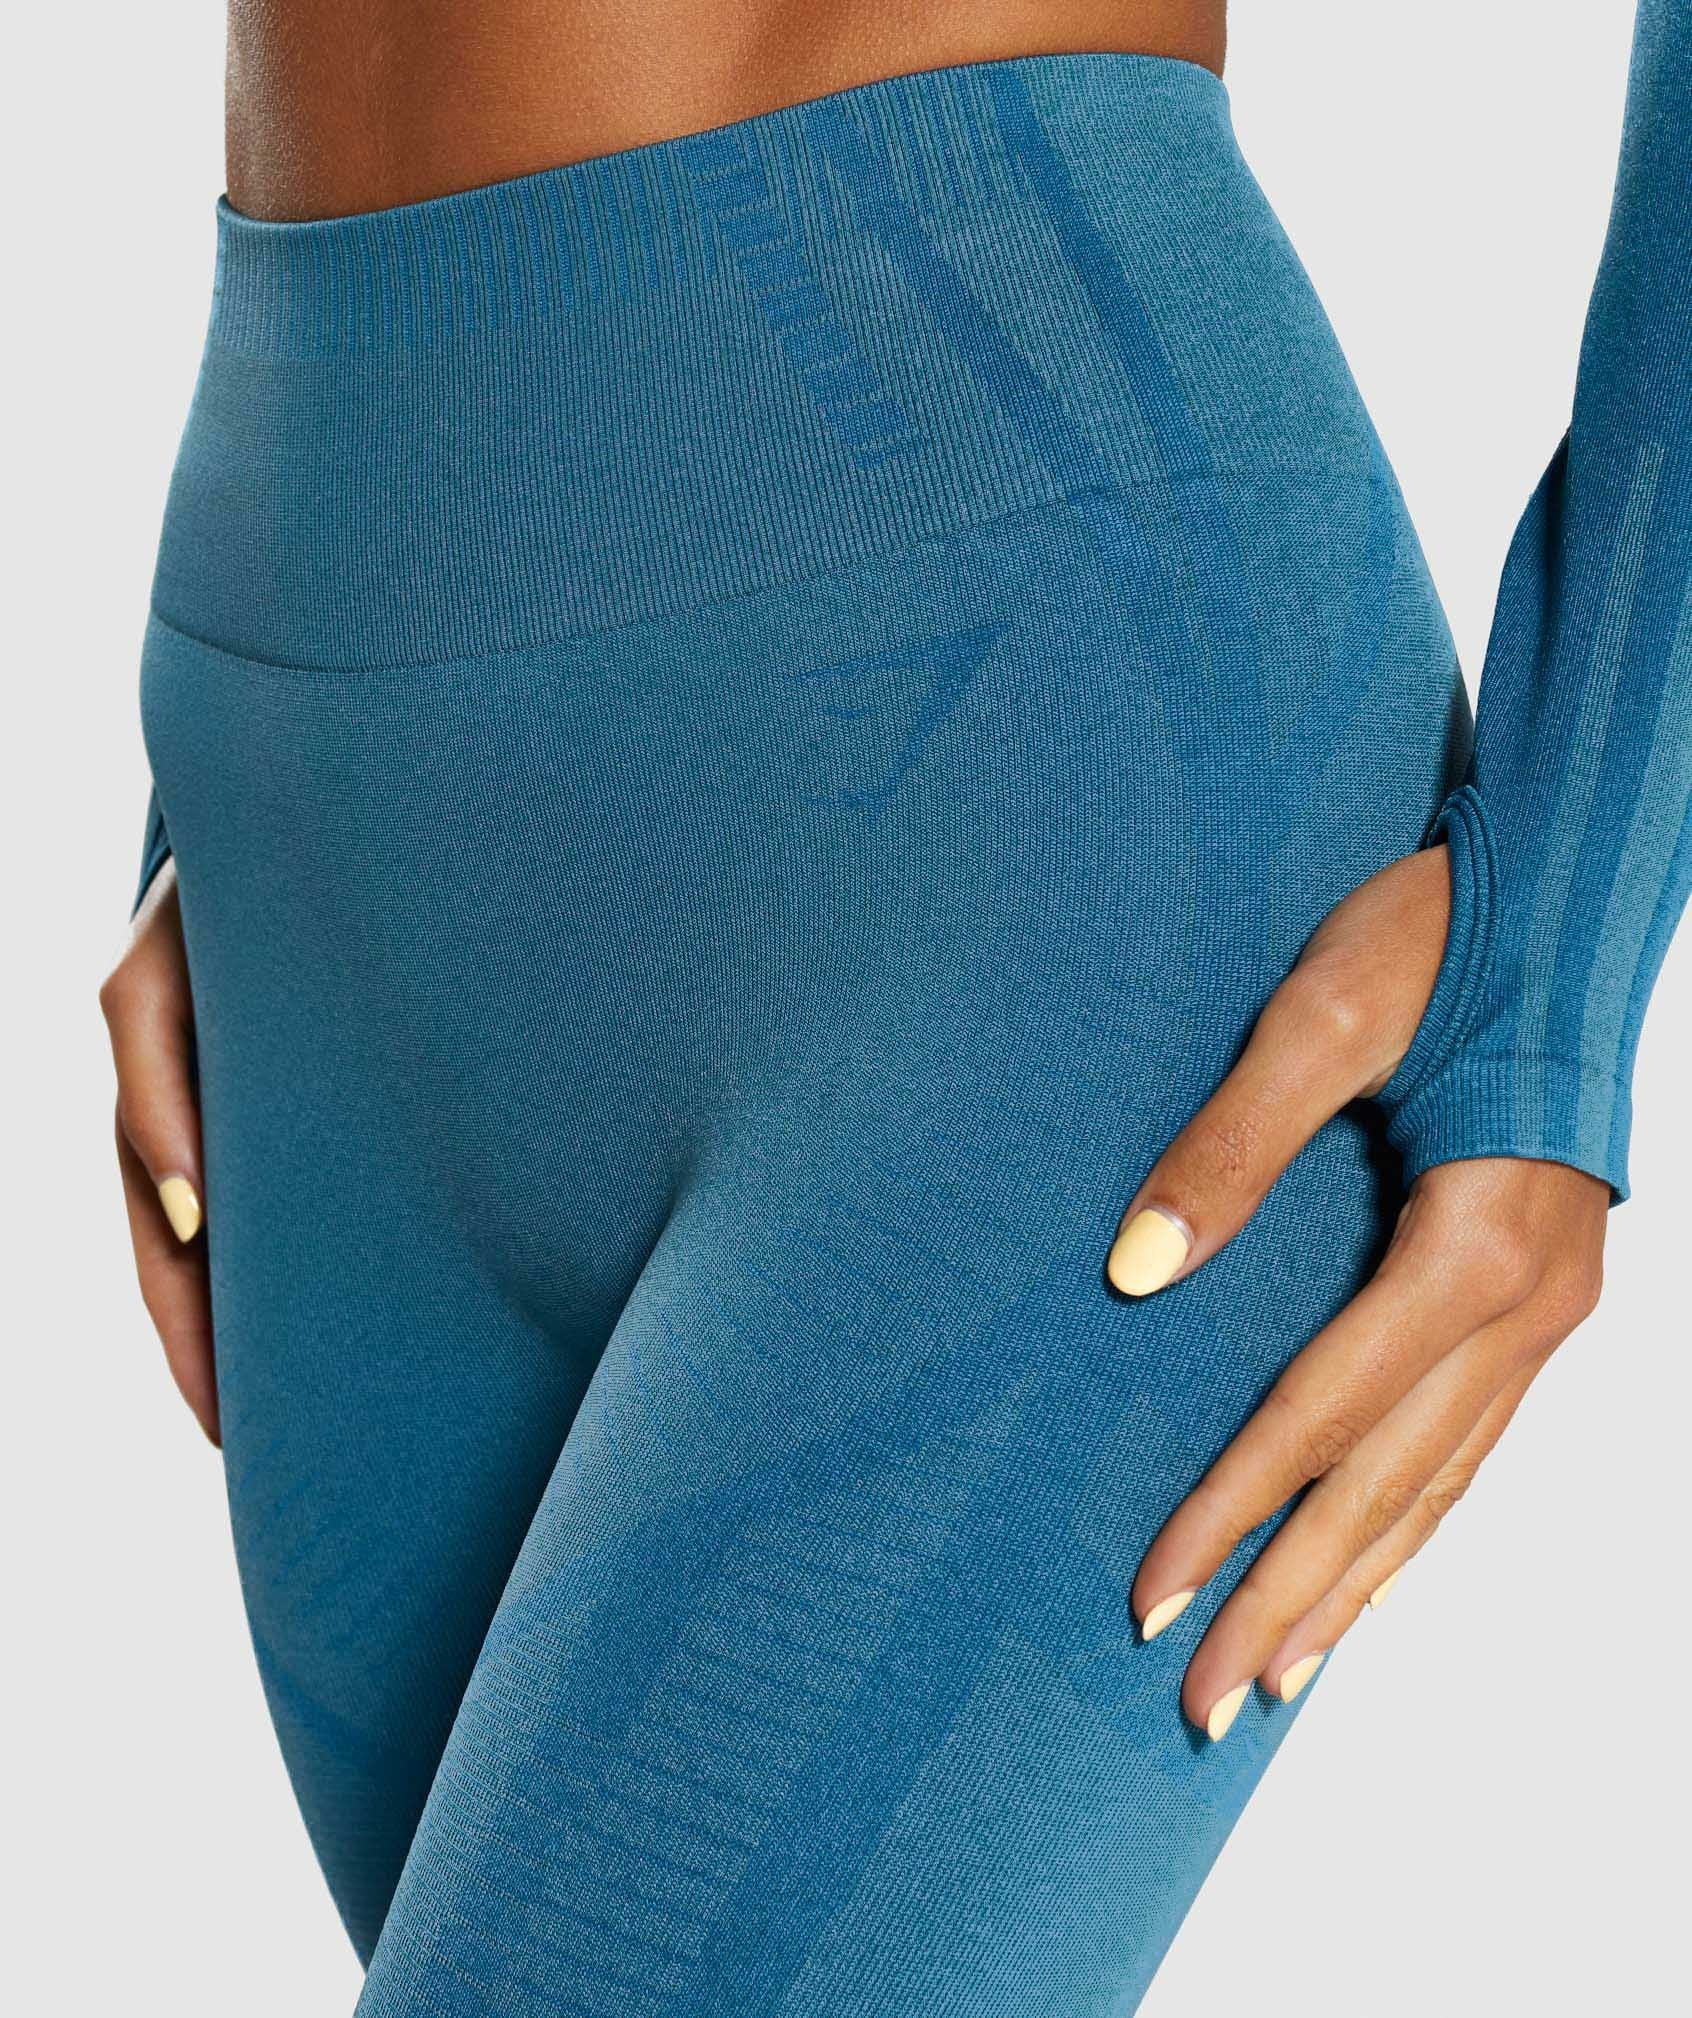 Gymshark Geo Seamless Cropped Ombre Leggings in Teal Tones Women's Size L  Blue : r/gym_apparel_for_women